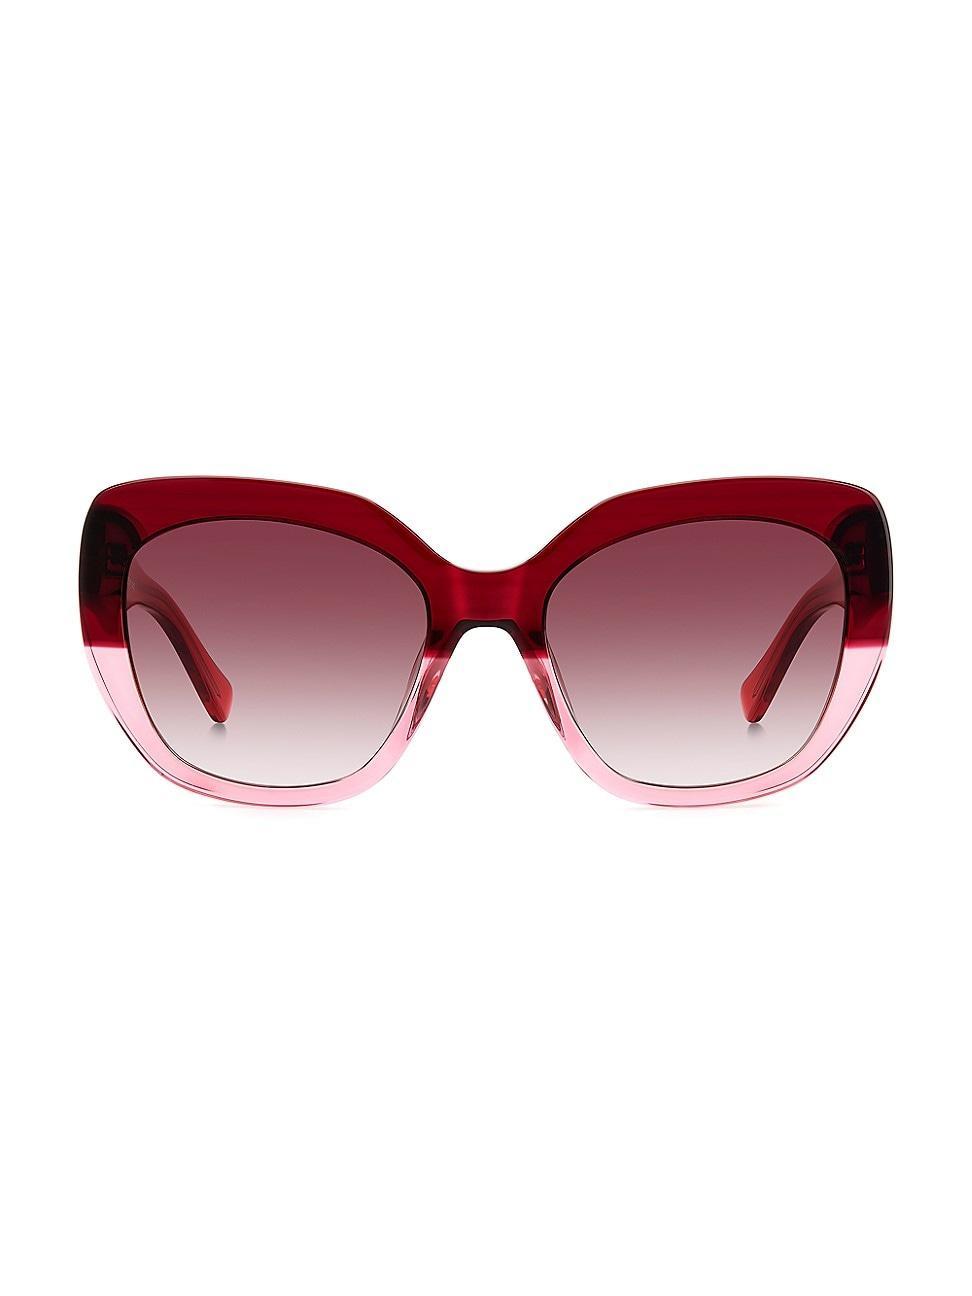 kate spade new york winslet 55mm gradient round sunglasses Product Image